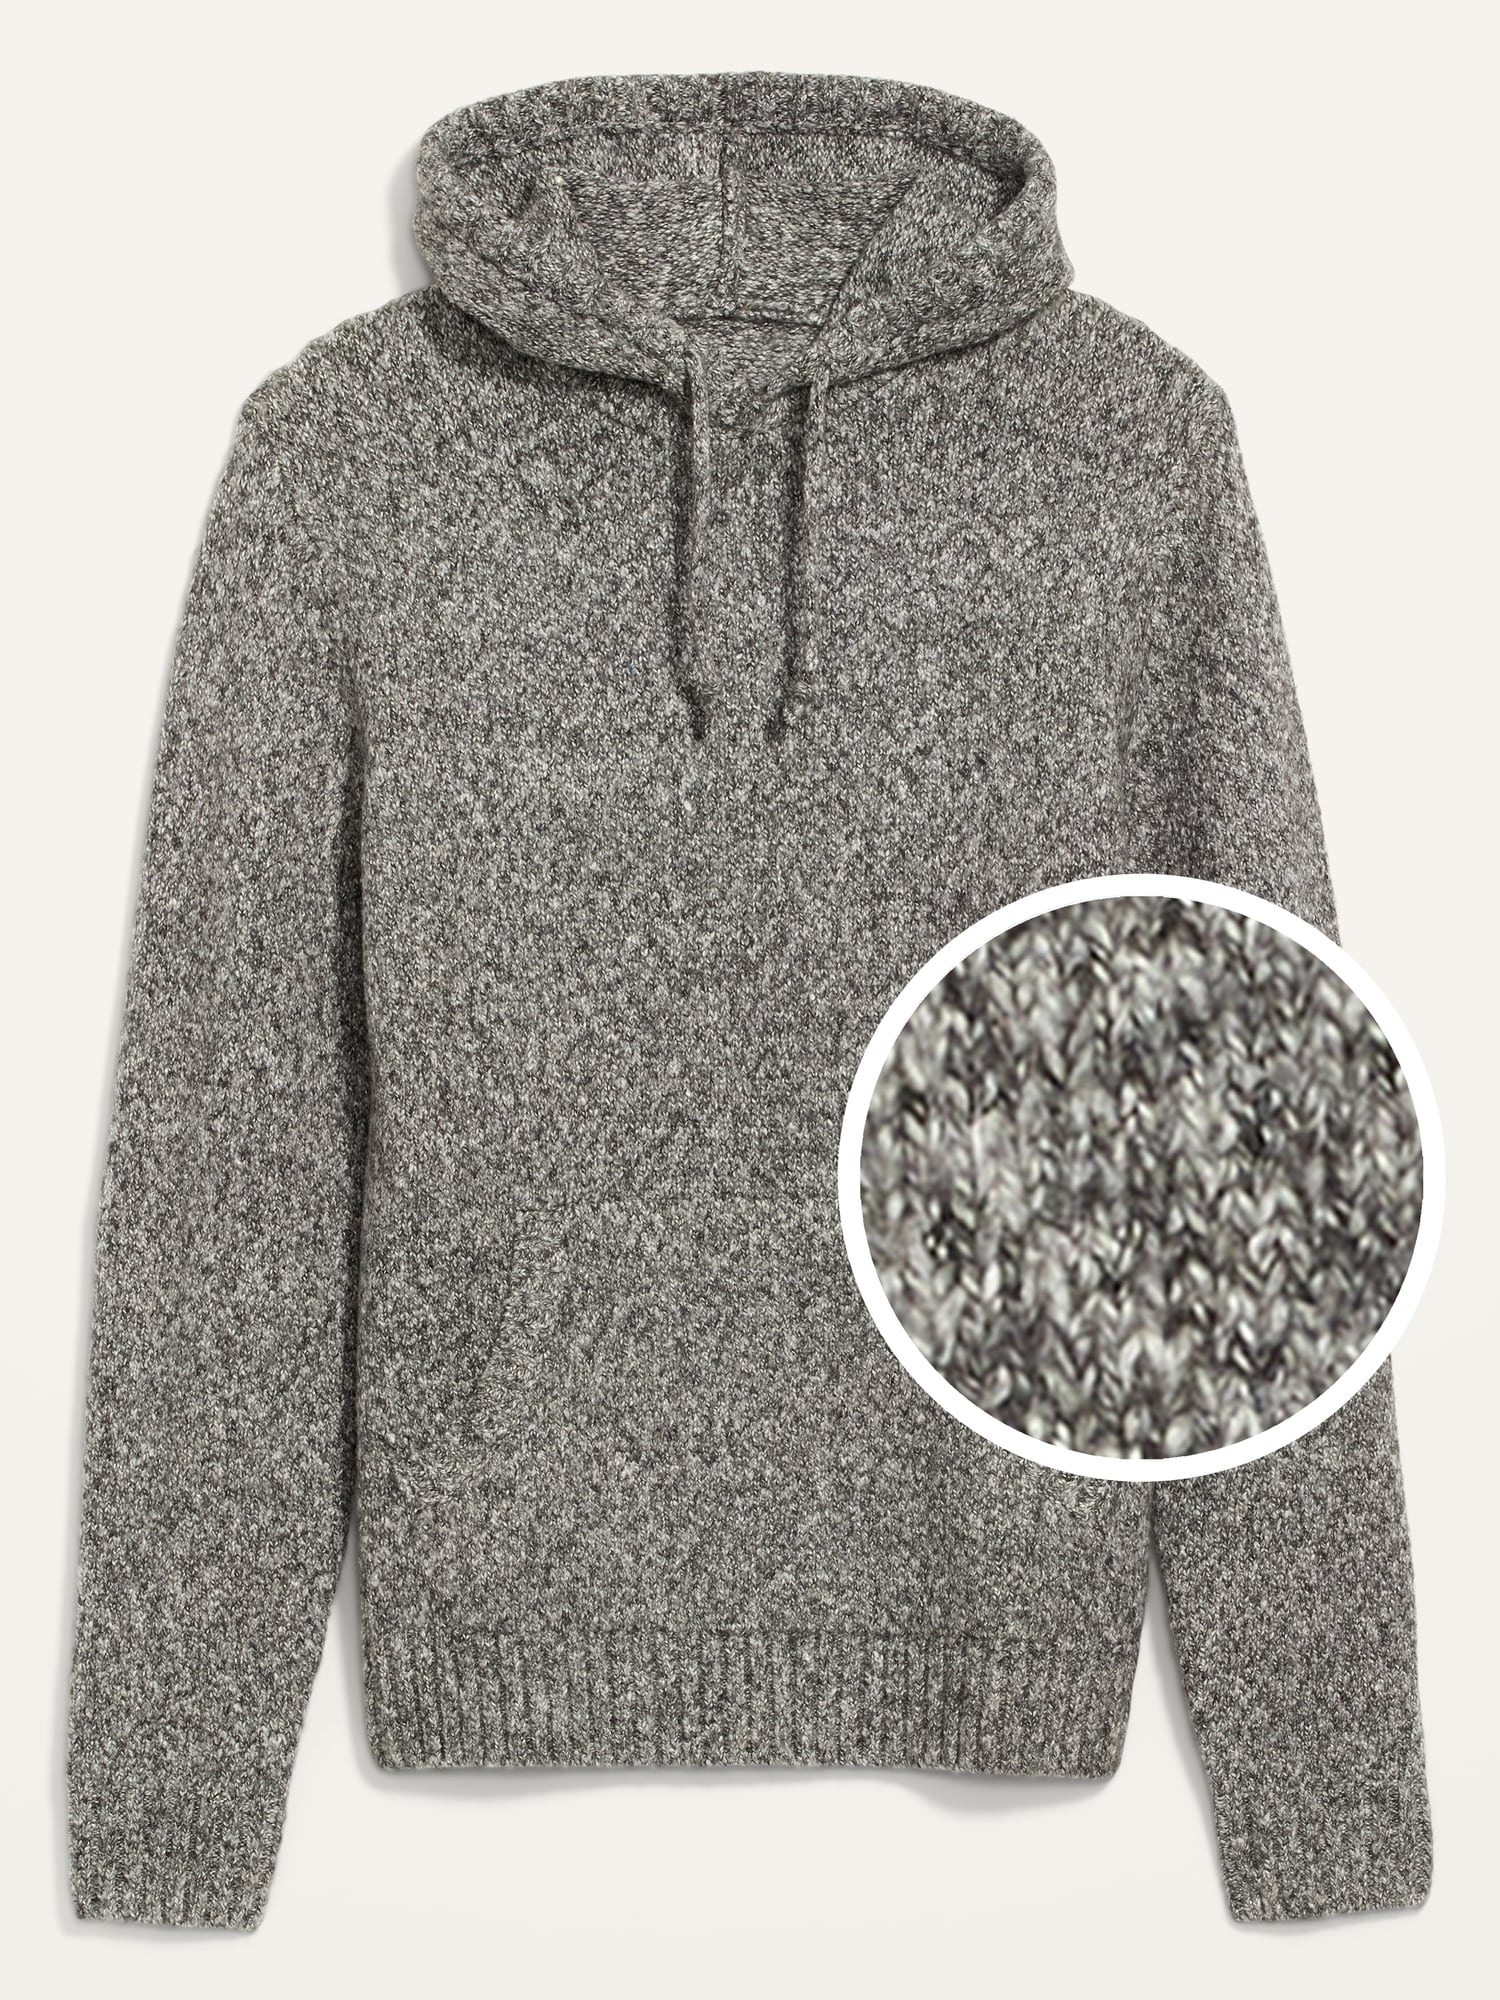 Cozy Sweater Pullover Hoodie for Men, Old Navy